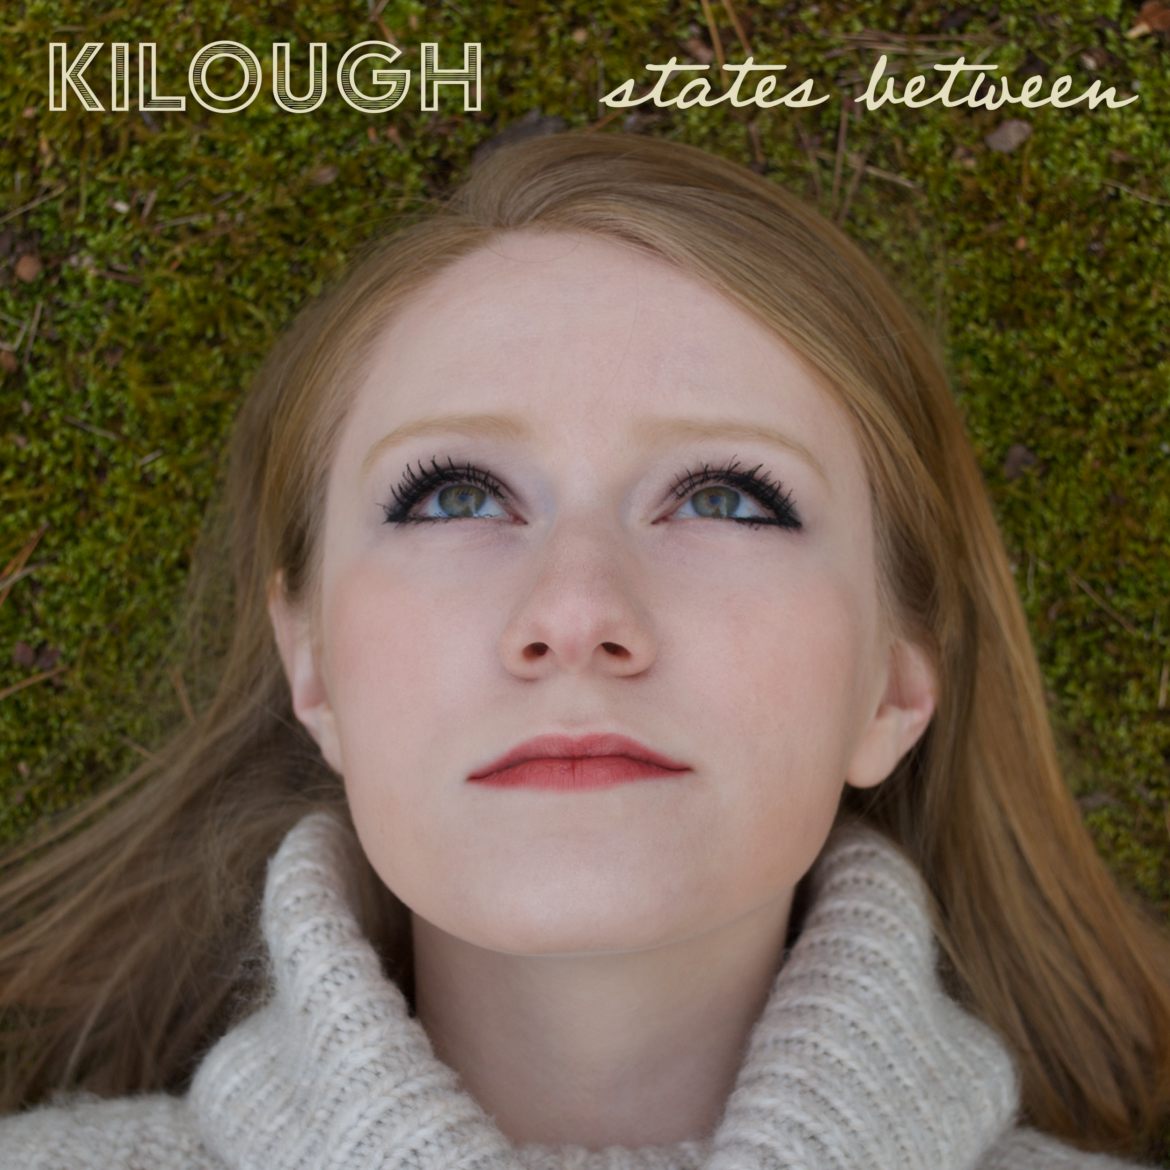 Kilough’s ‘States Between’ Brings Listeners Places In A Dreamy Spirit